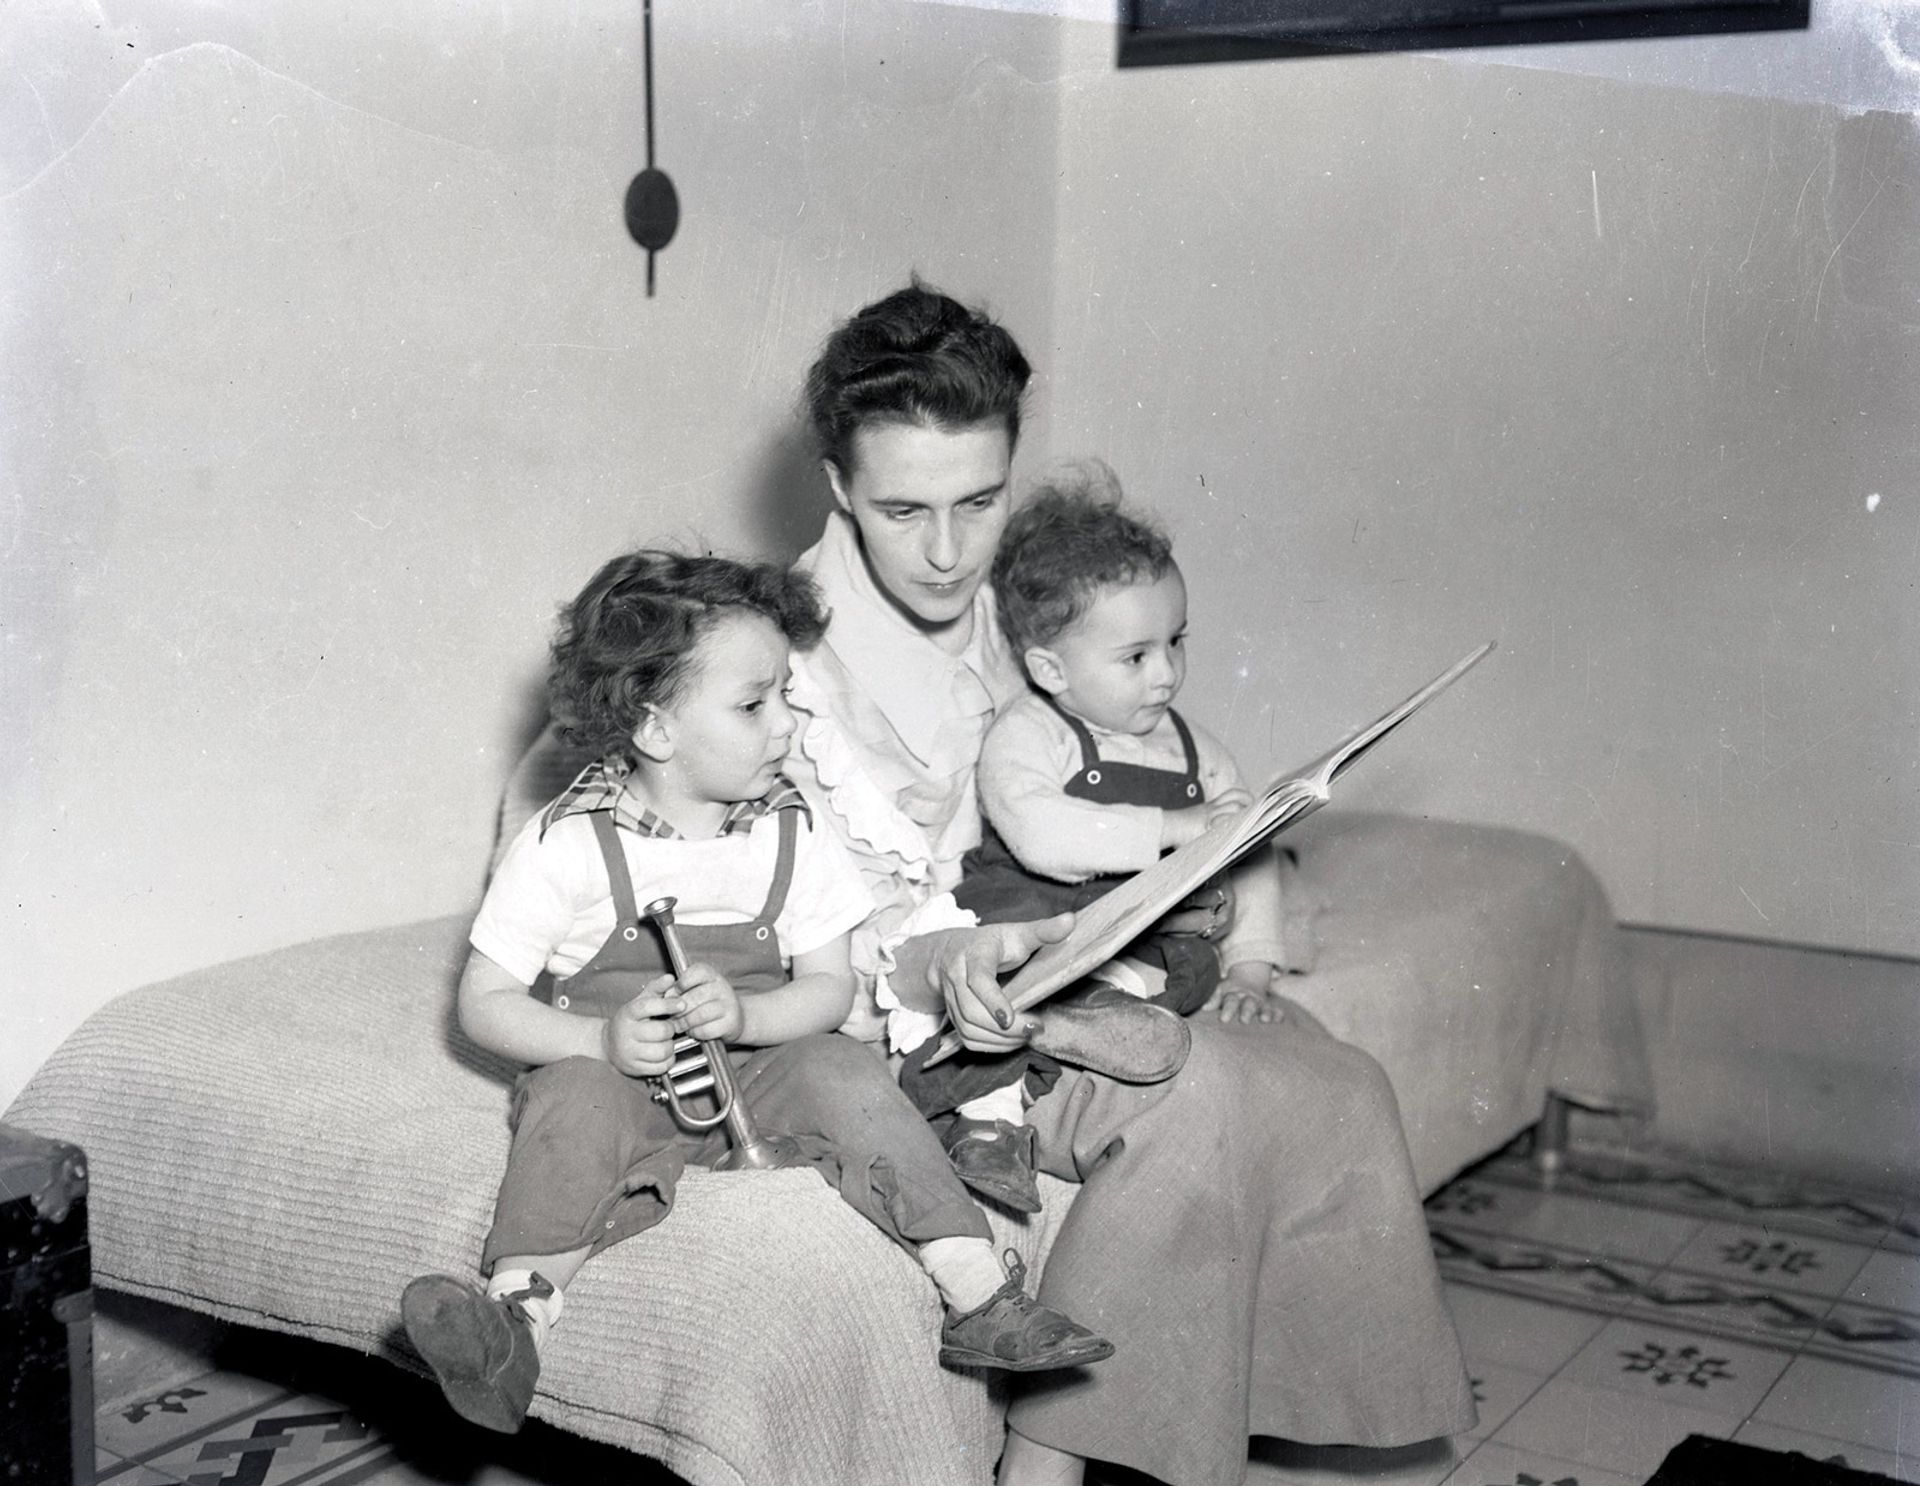 “Fantastical bedtime stories”: Leonora Carrington reads to her sons Gabriel and Pablo © Estate of Leonora Carrington/DACS